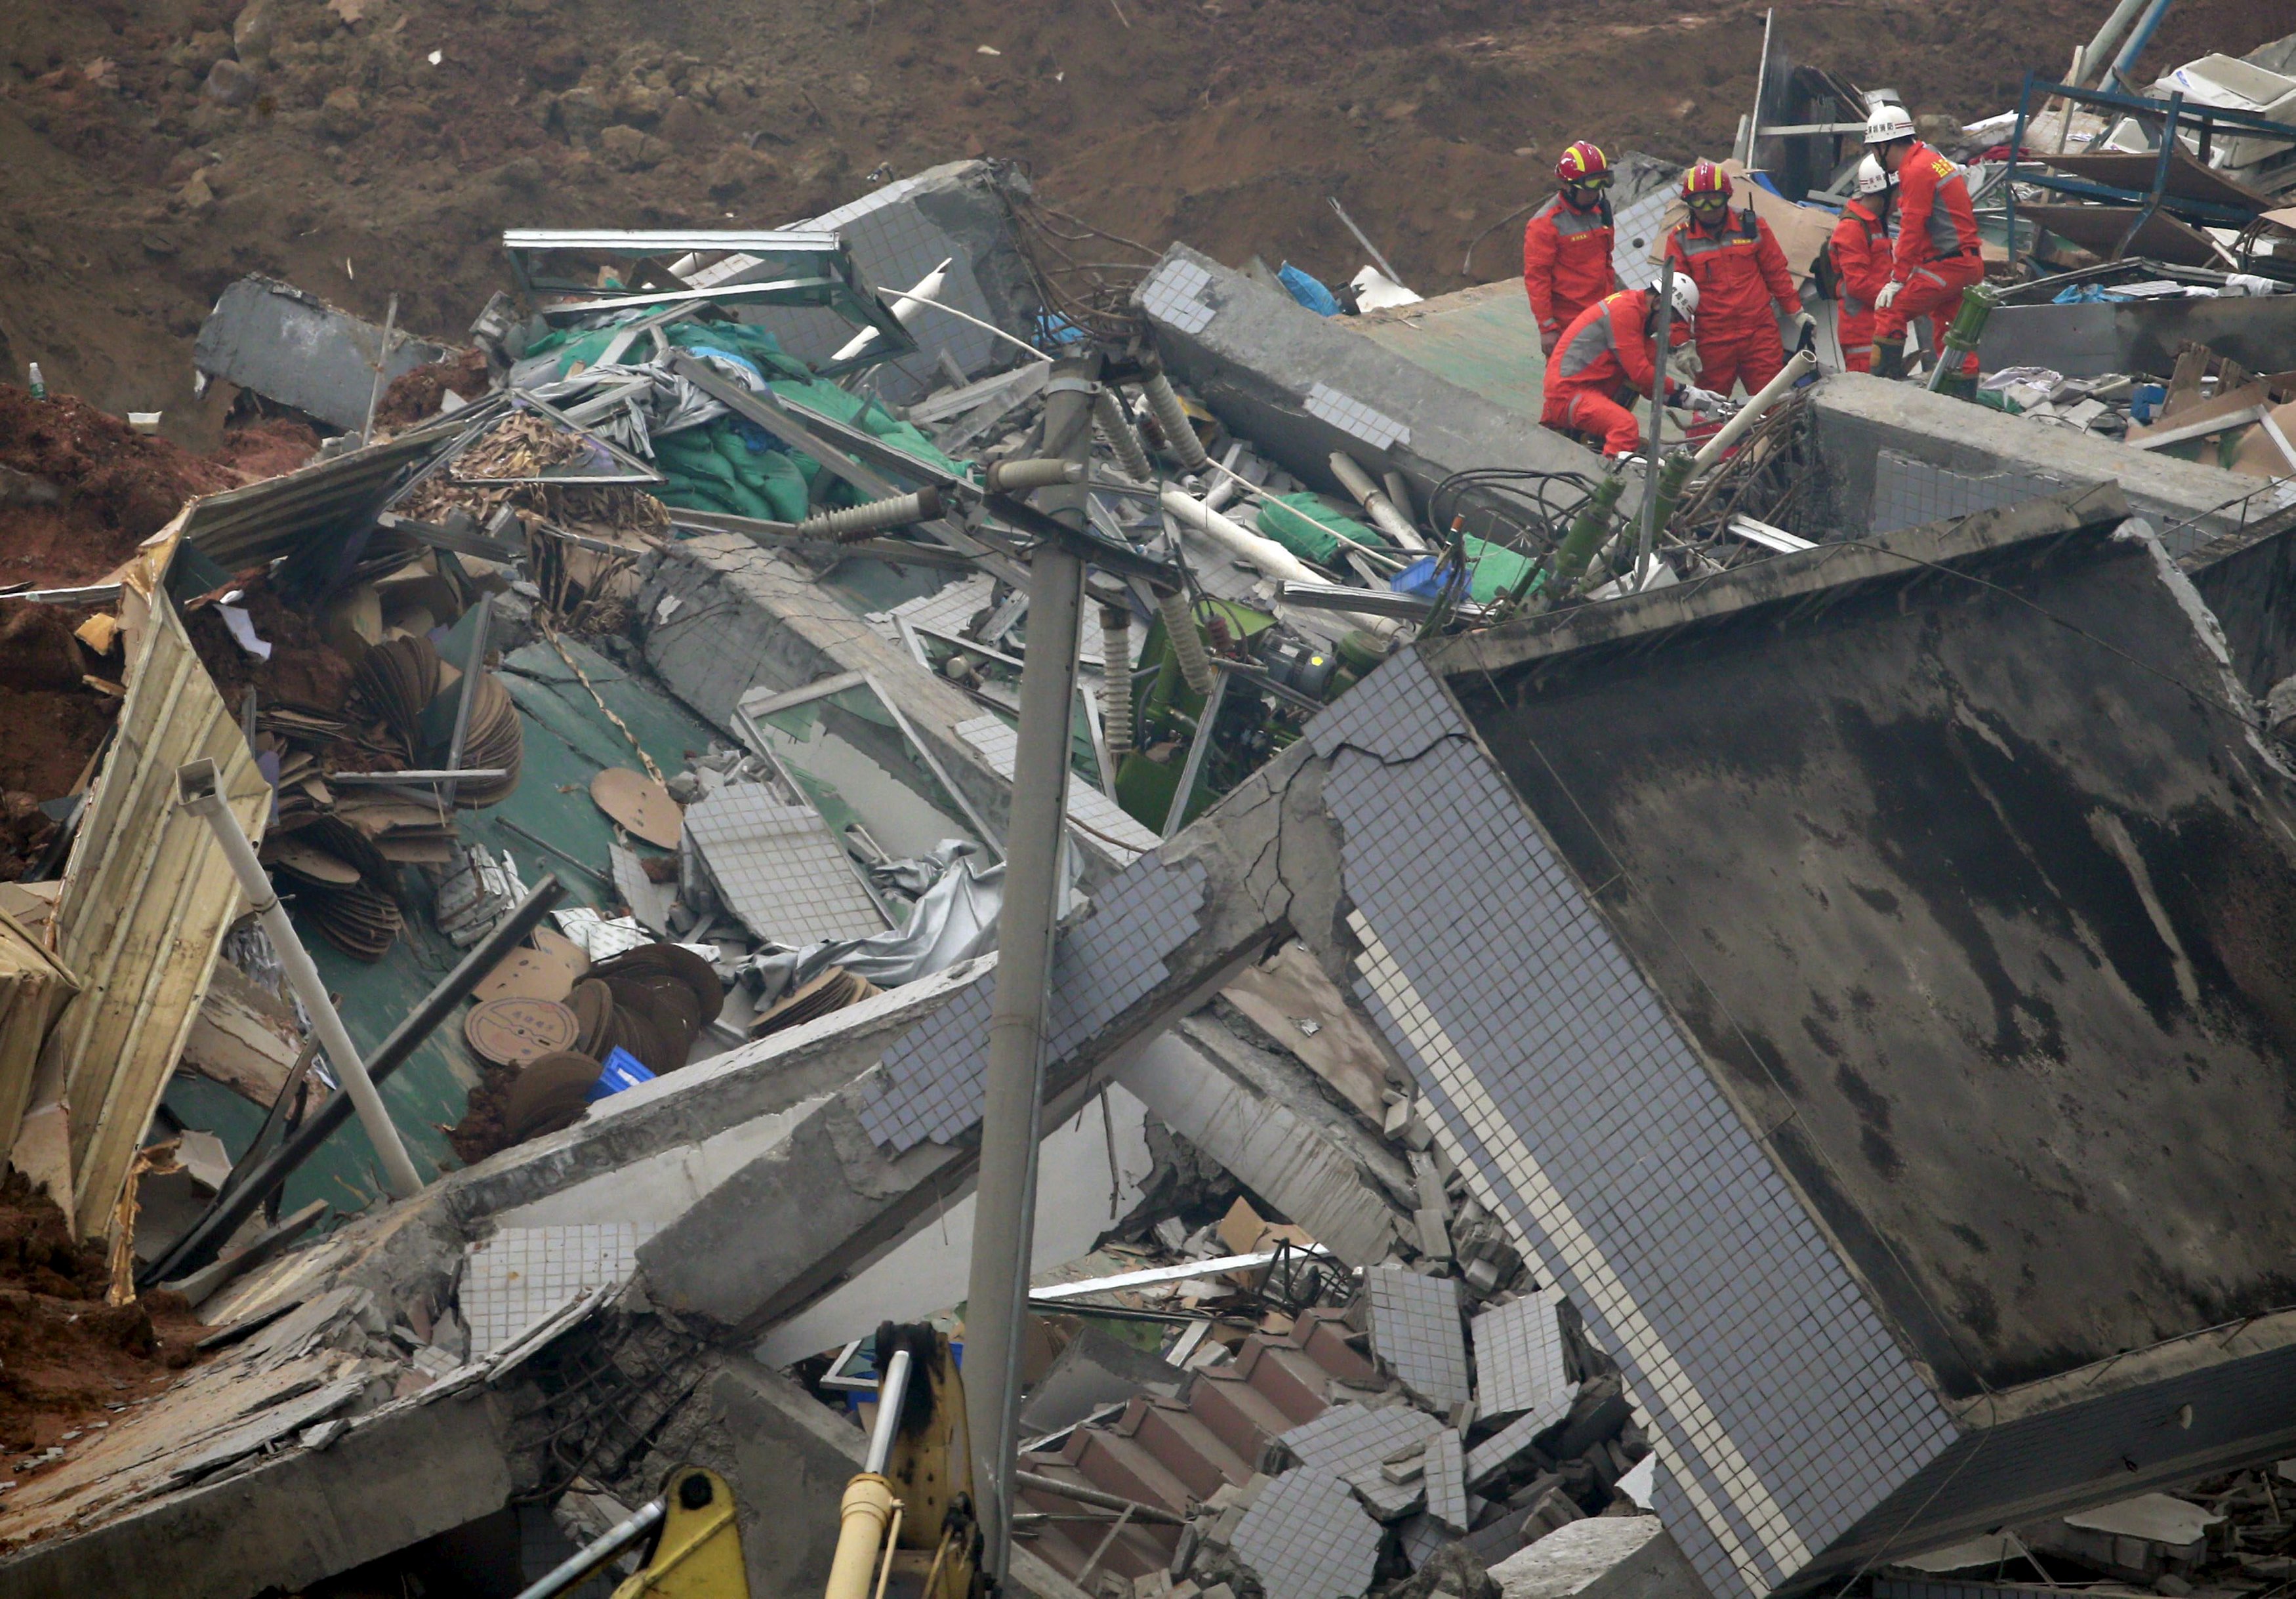 Rescue workers work on a damaged building during search and rescue operations at an industrial estate hit by a landslide in Shenzhen, Guangdong province, December 23, 2015. REUTERS/Kim Kyung-Hoon